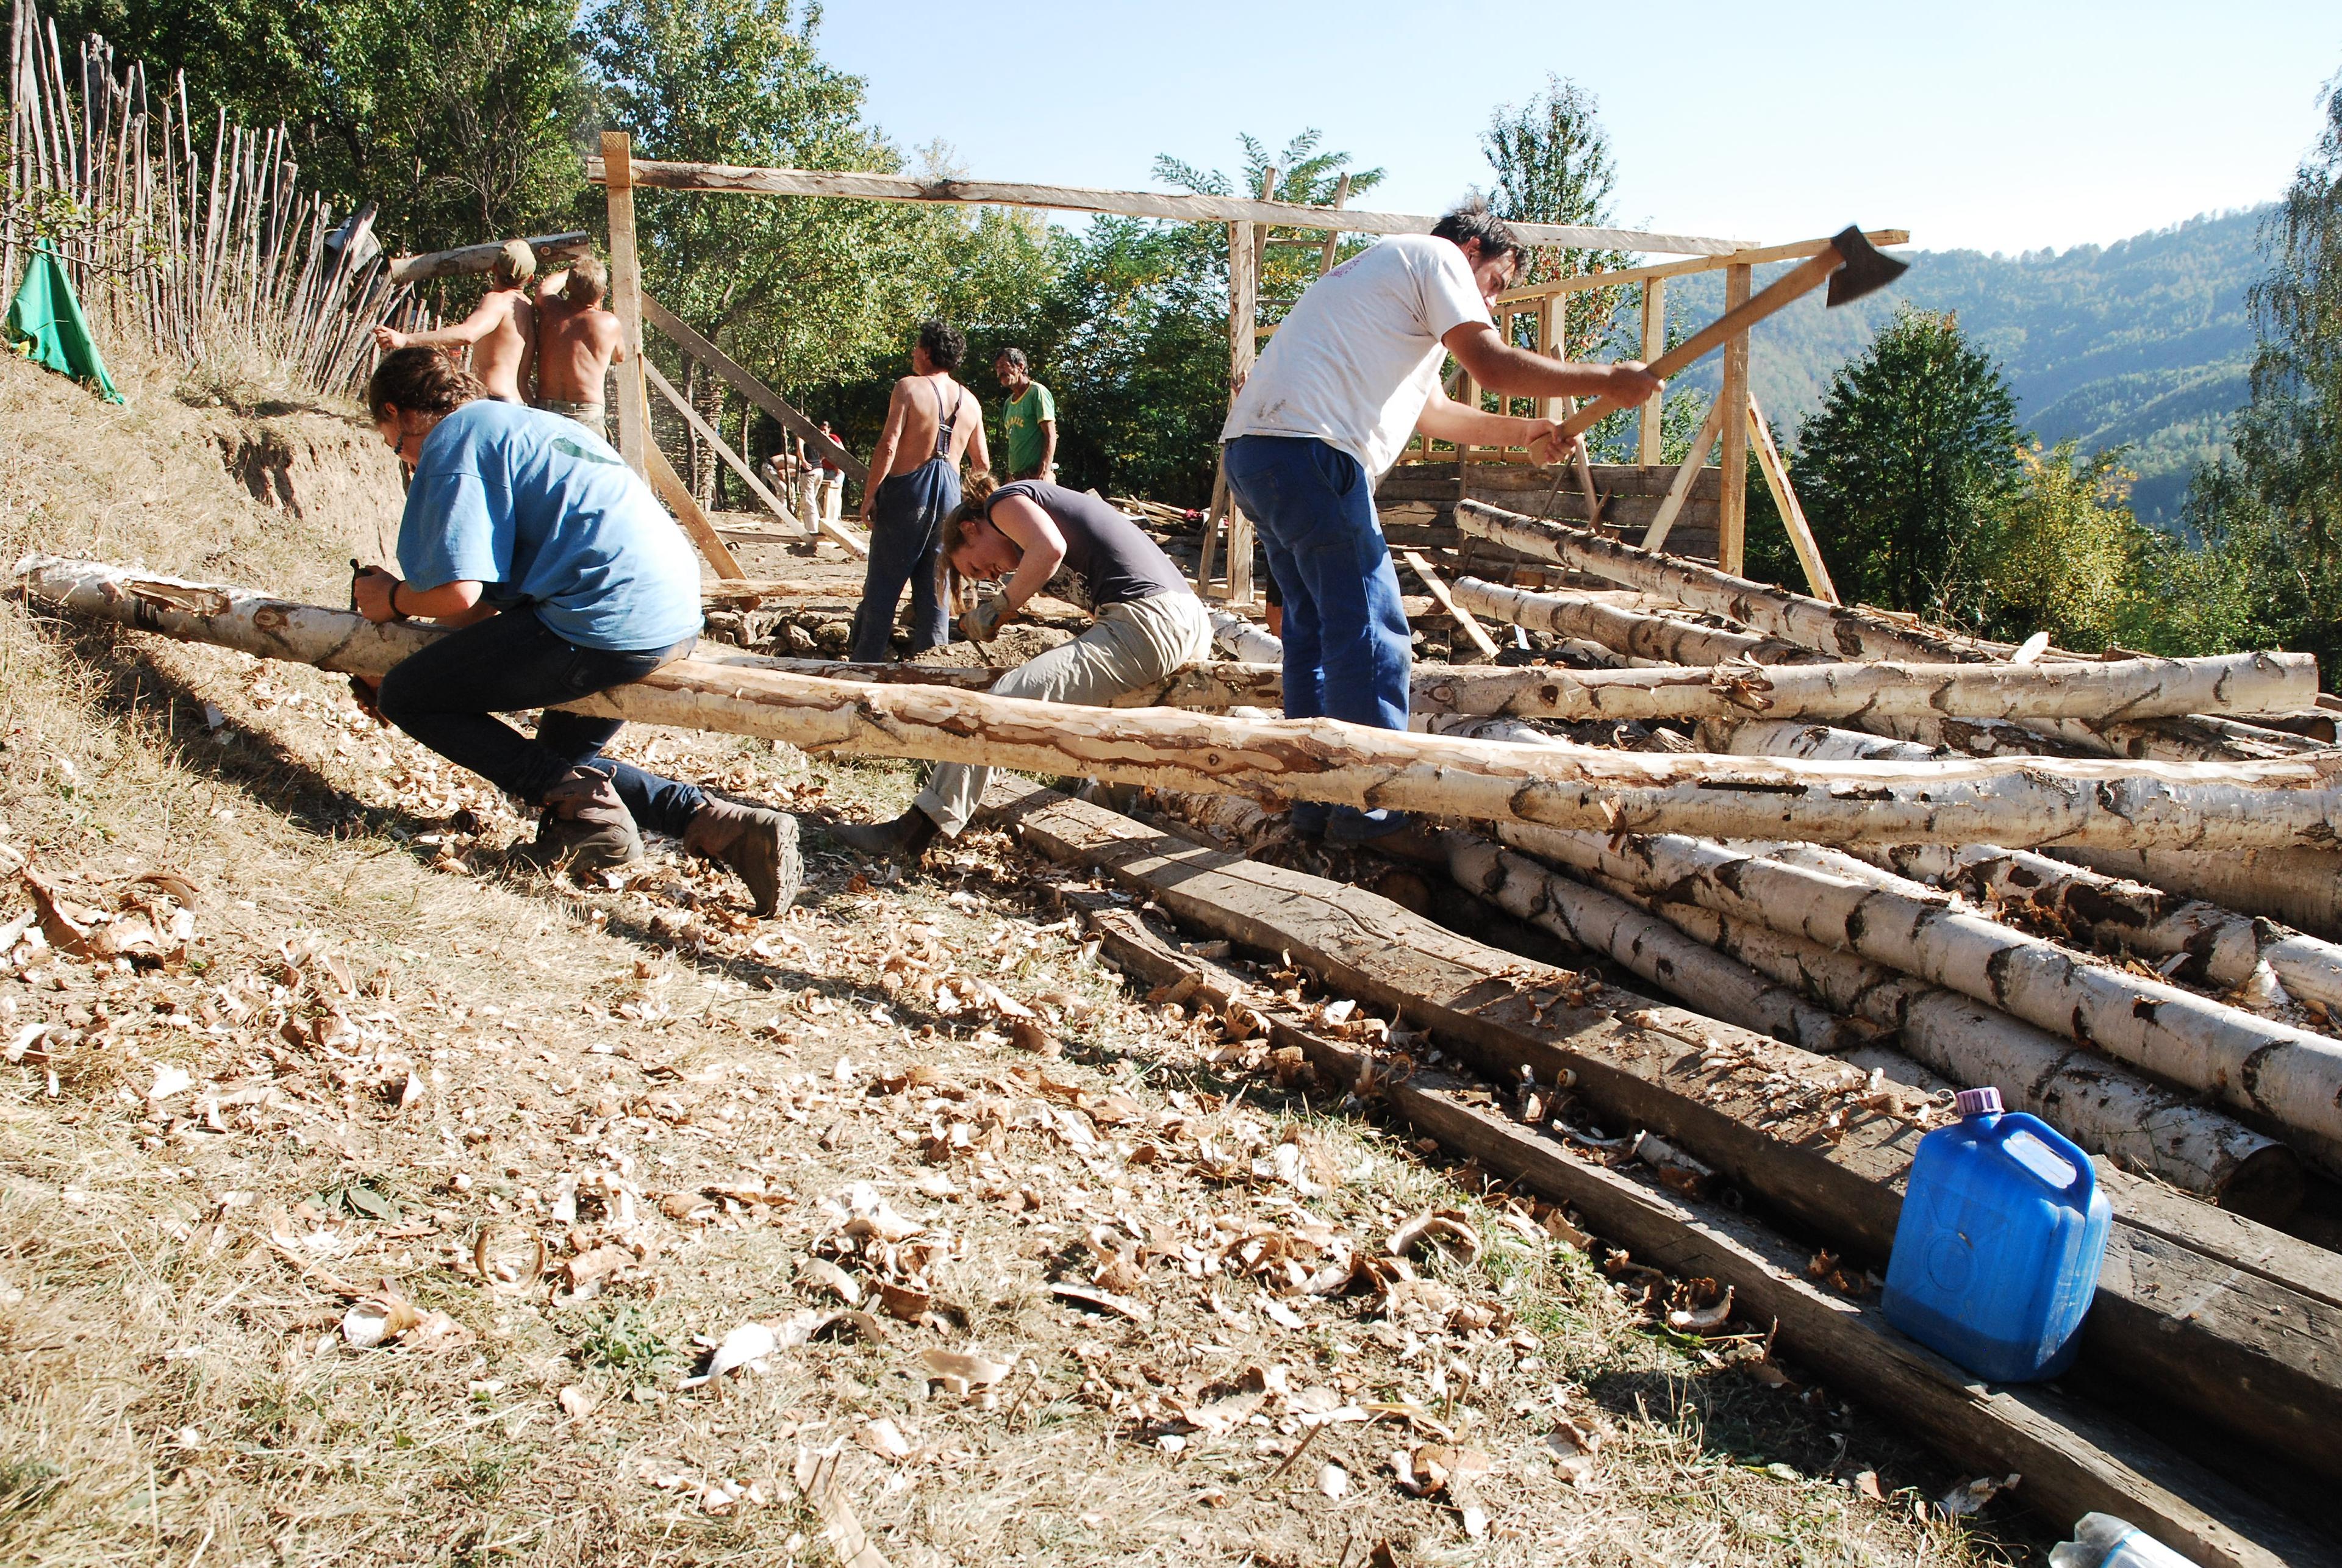 People working on building a wood house/structure